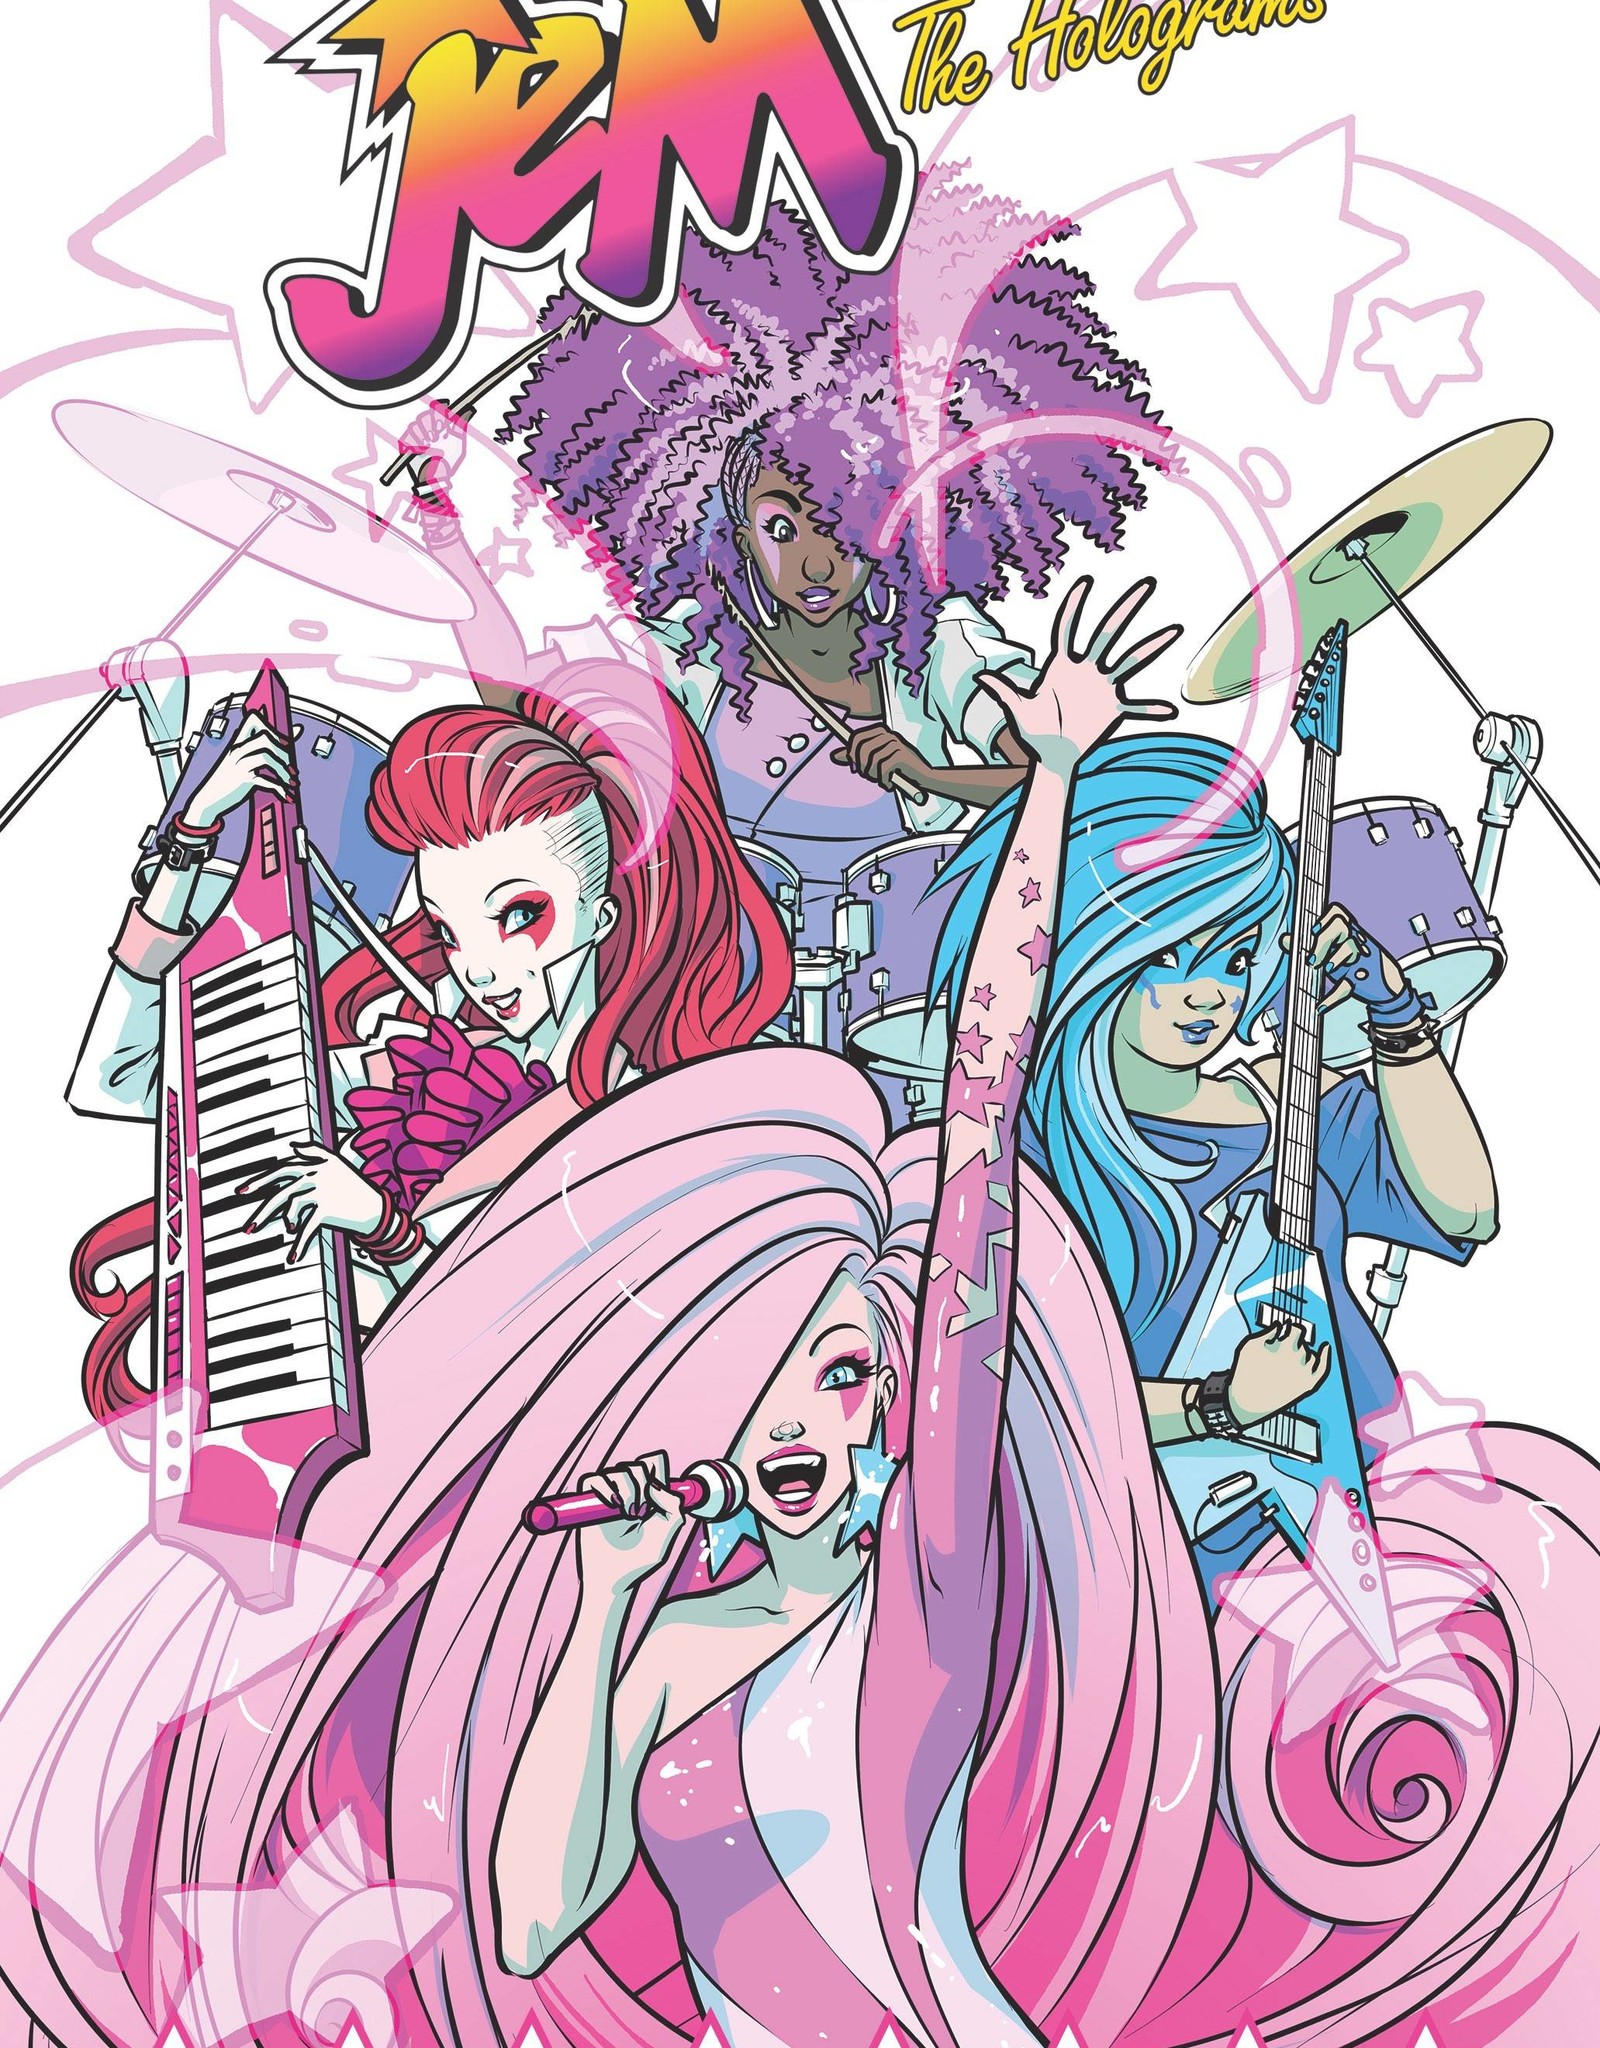 IDW Publishing Jem and the Holograms TP Volume 01 Showtime